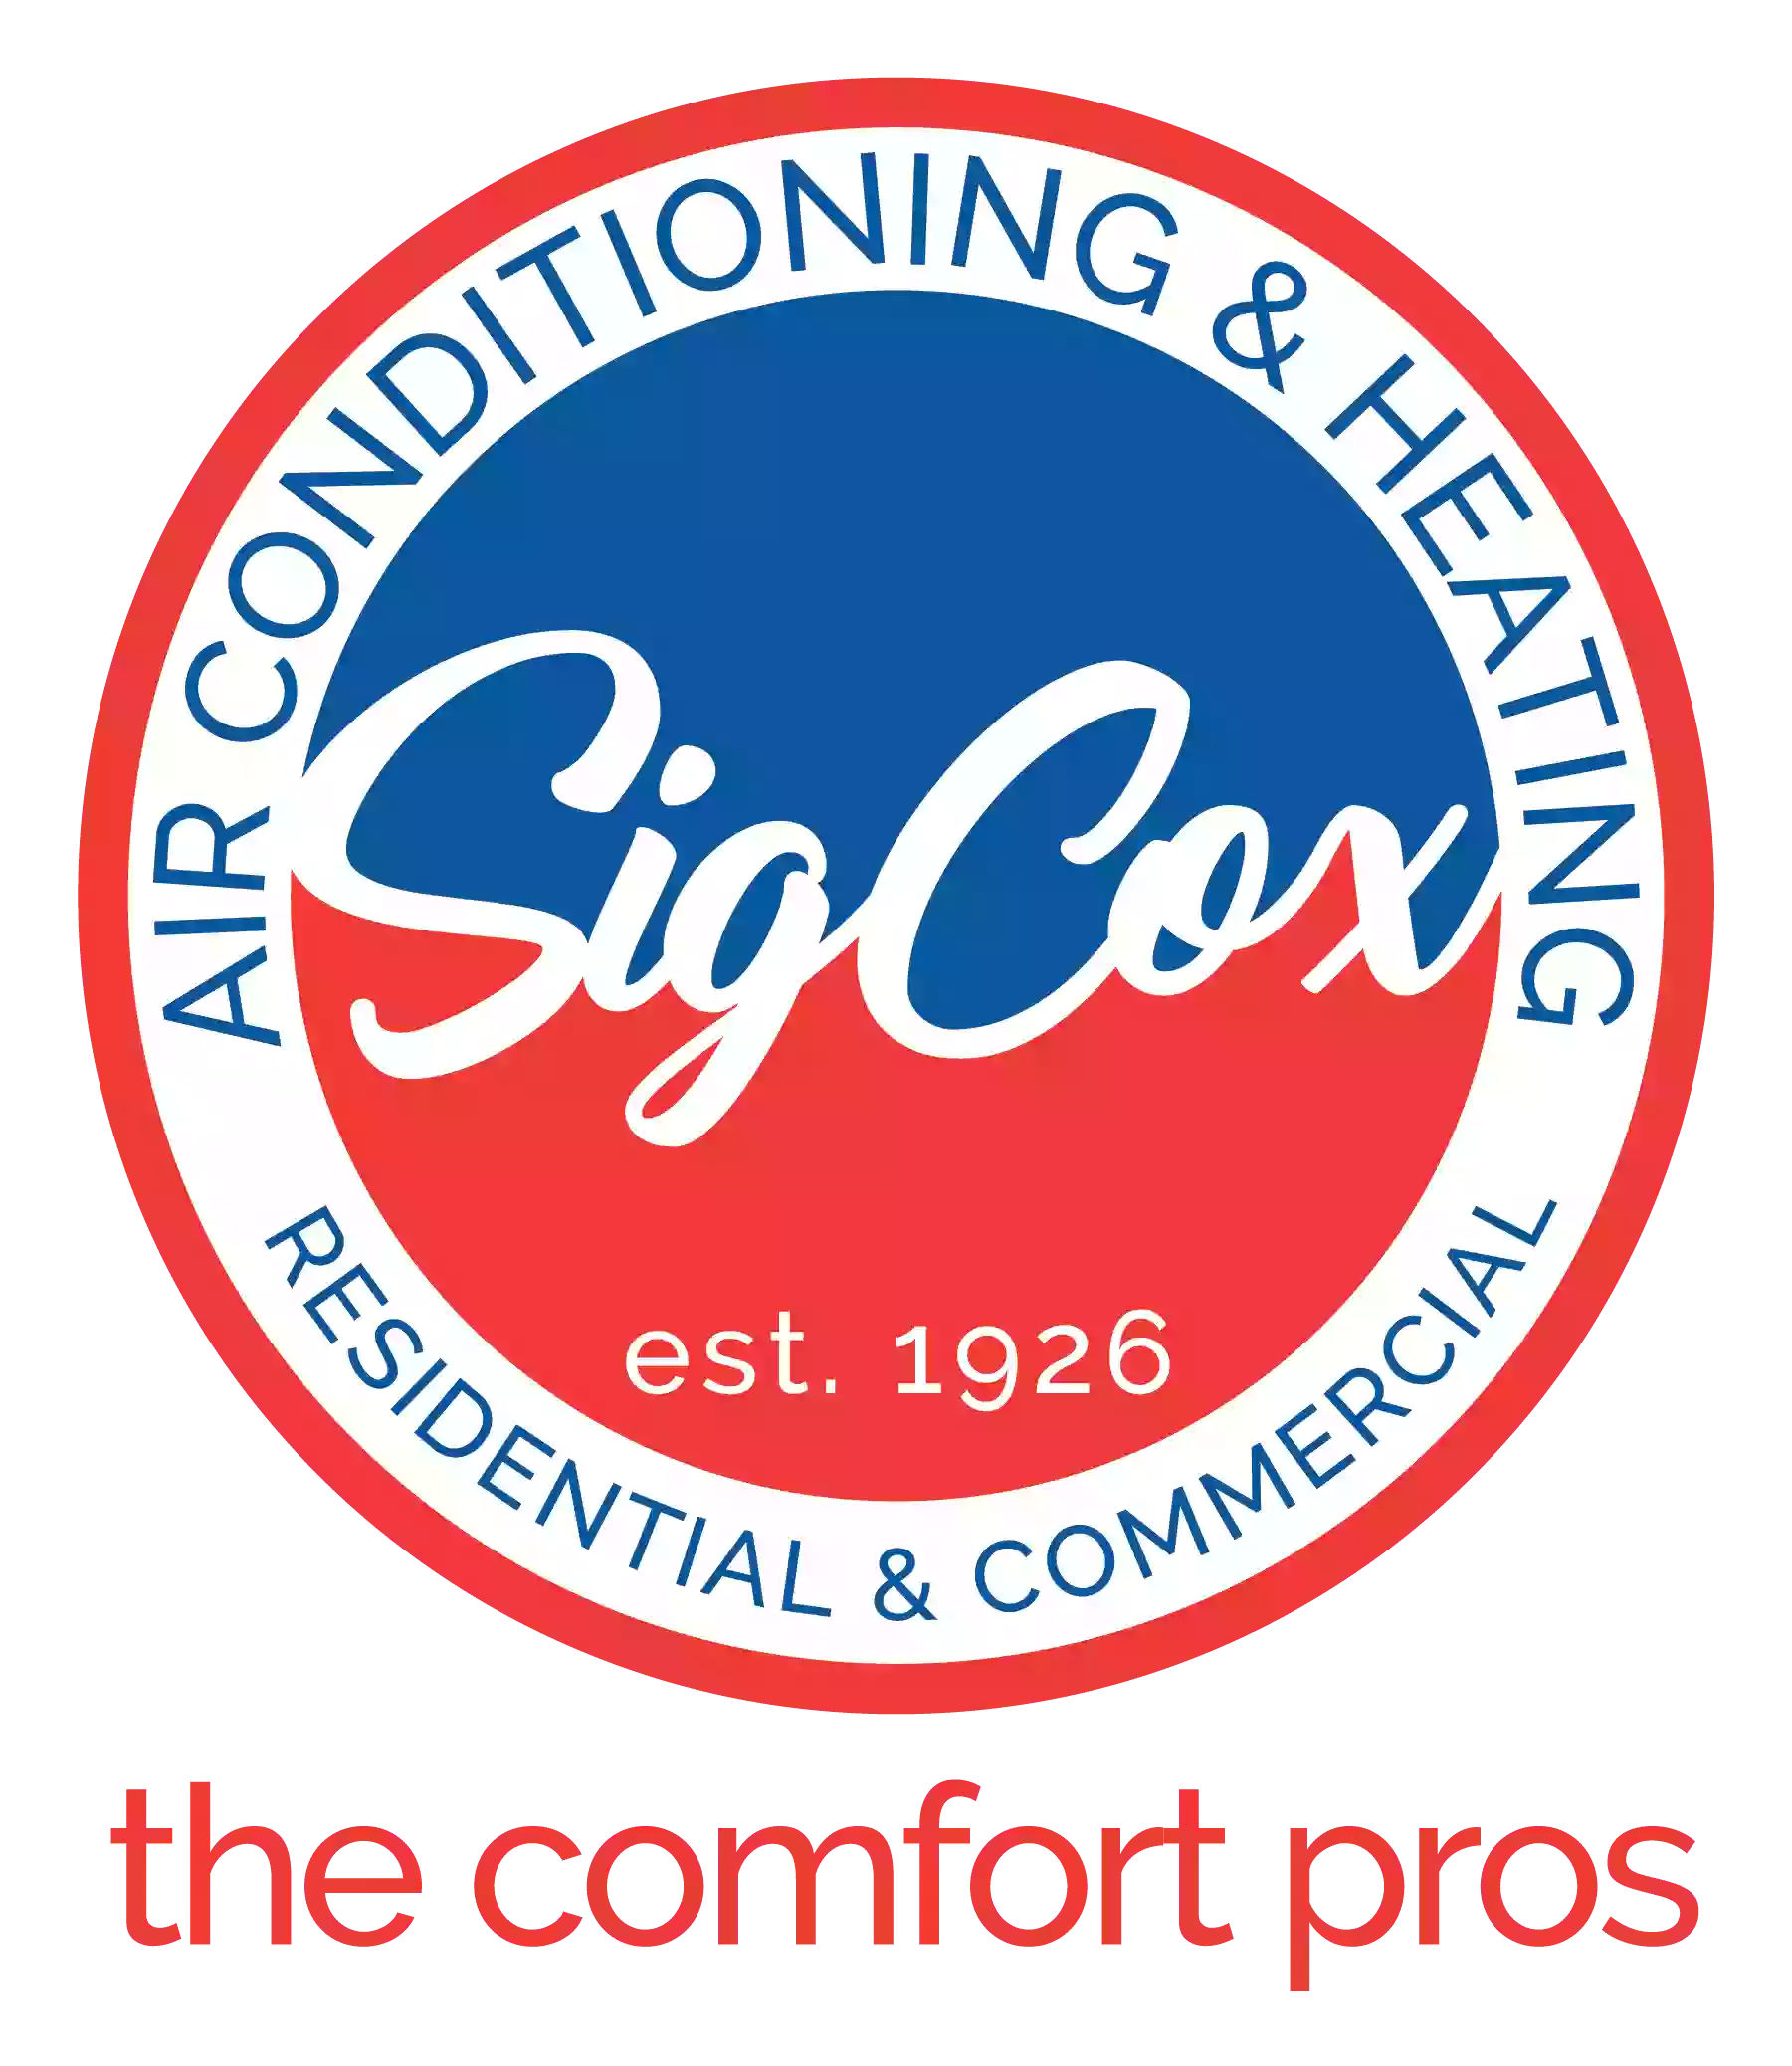 Sig Cox Heating & Air Conditioning